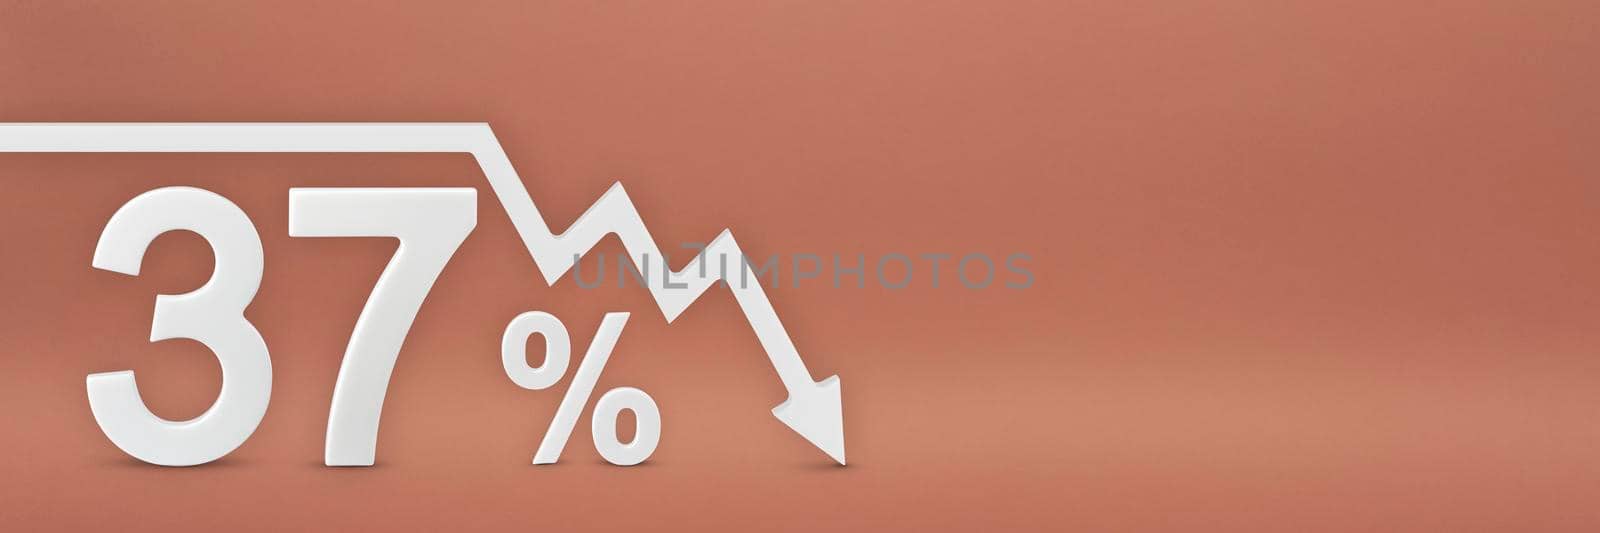 thirty-seven percent, the arrow on the graph is pointing down. Stock market crash, bear market, inflation.Economic collapse, collapse of stocks.3d banner,37 percent discount sign on a red background